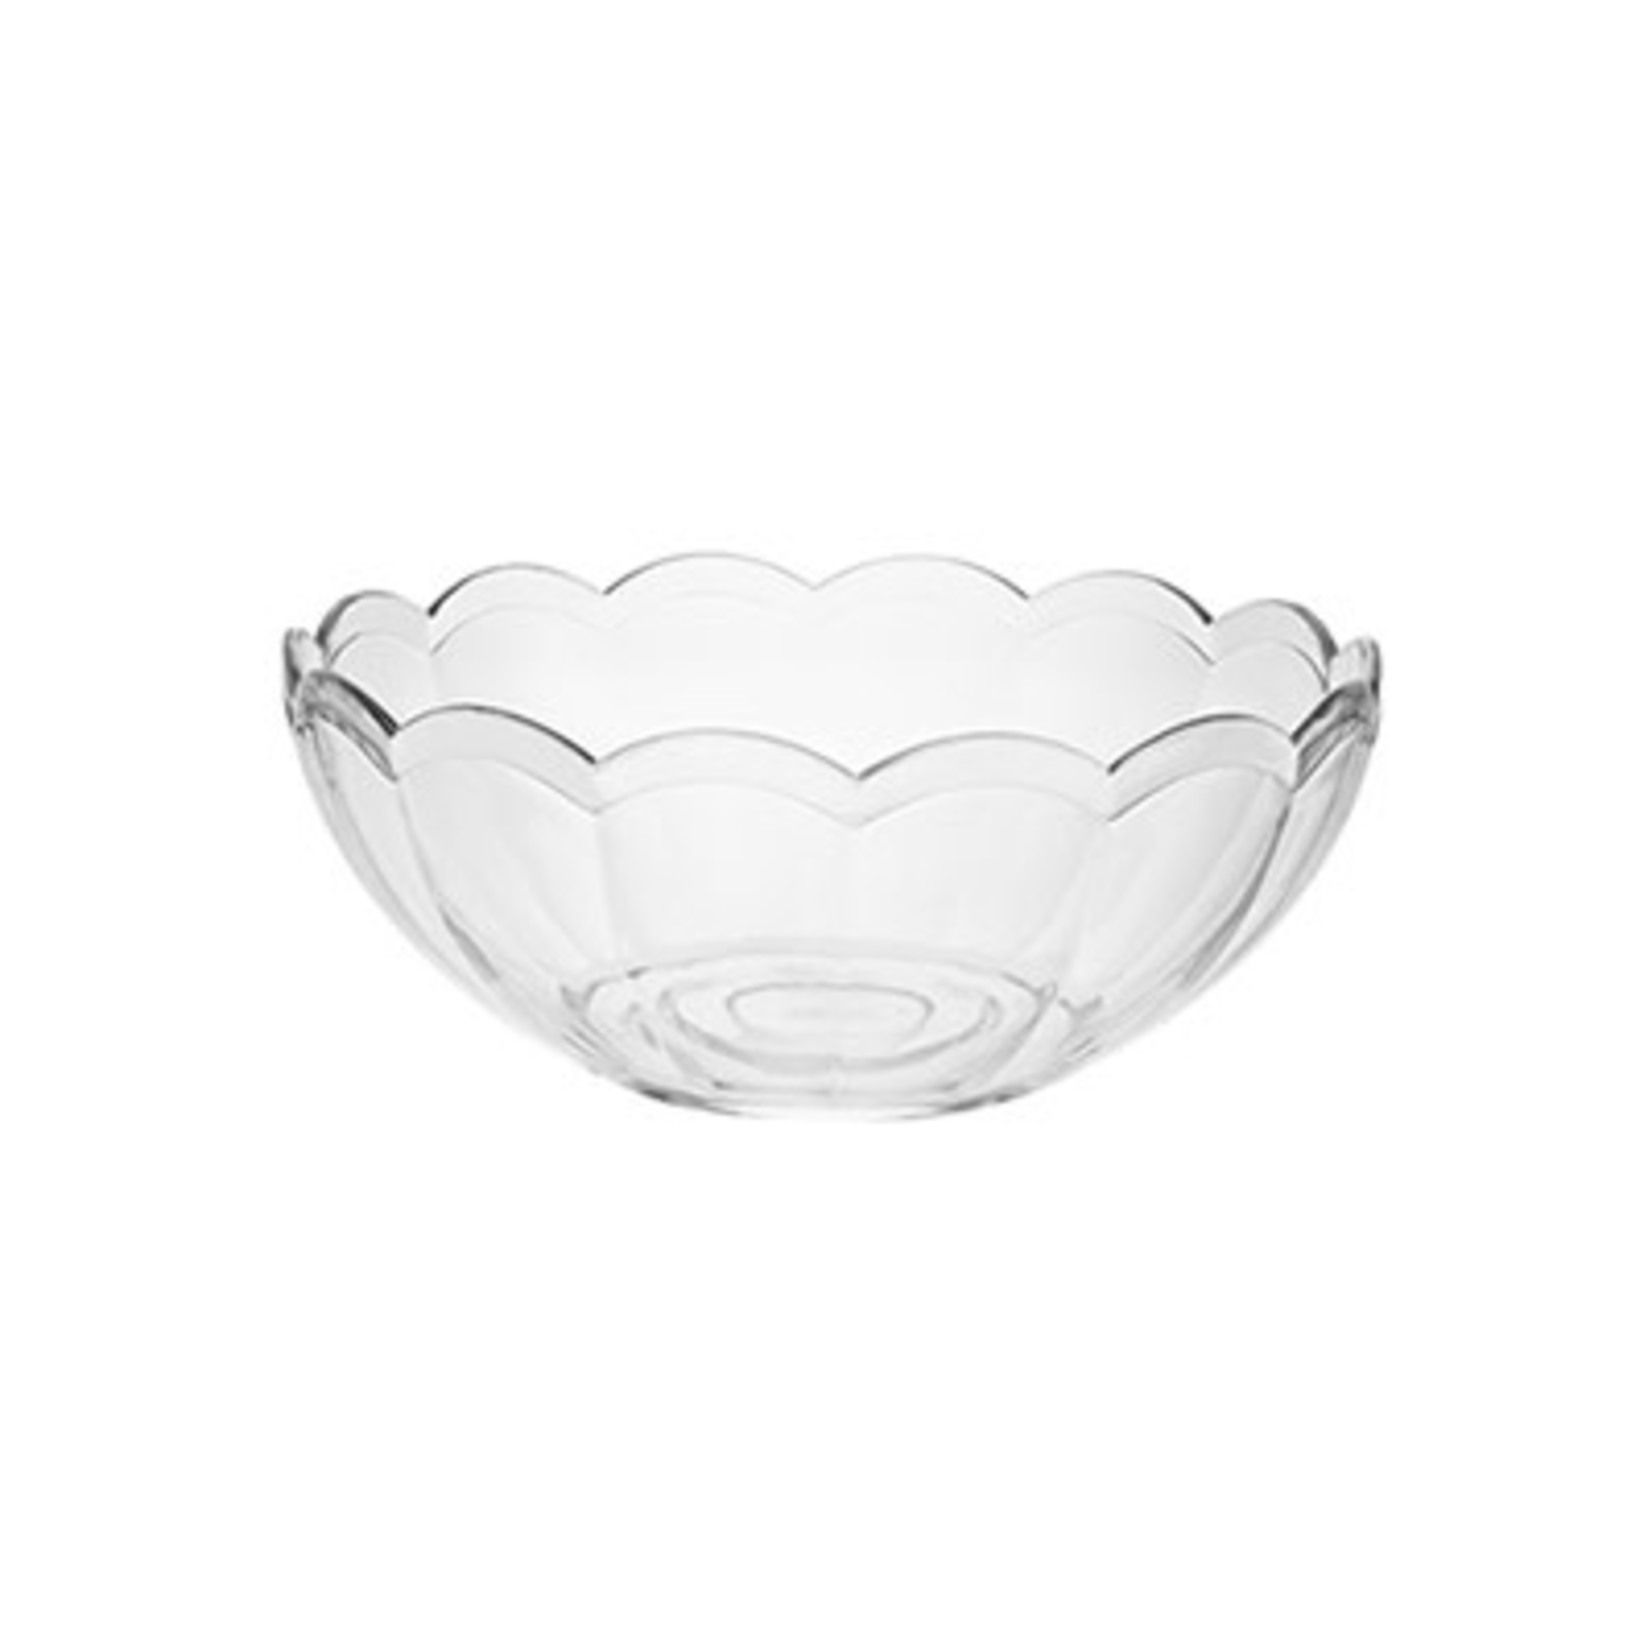 northwest 8oz. Clear Deluxe Snack Bowl - 1ct.